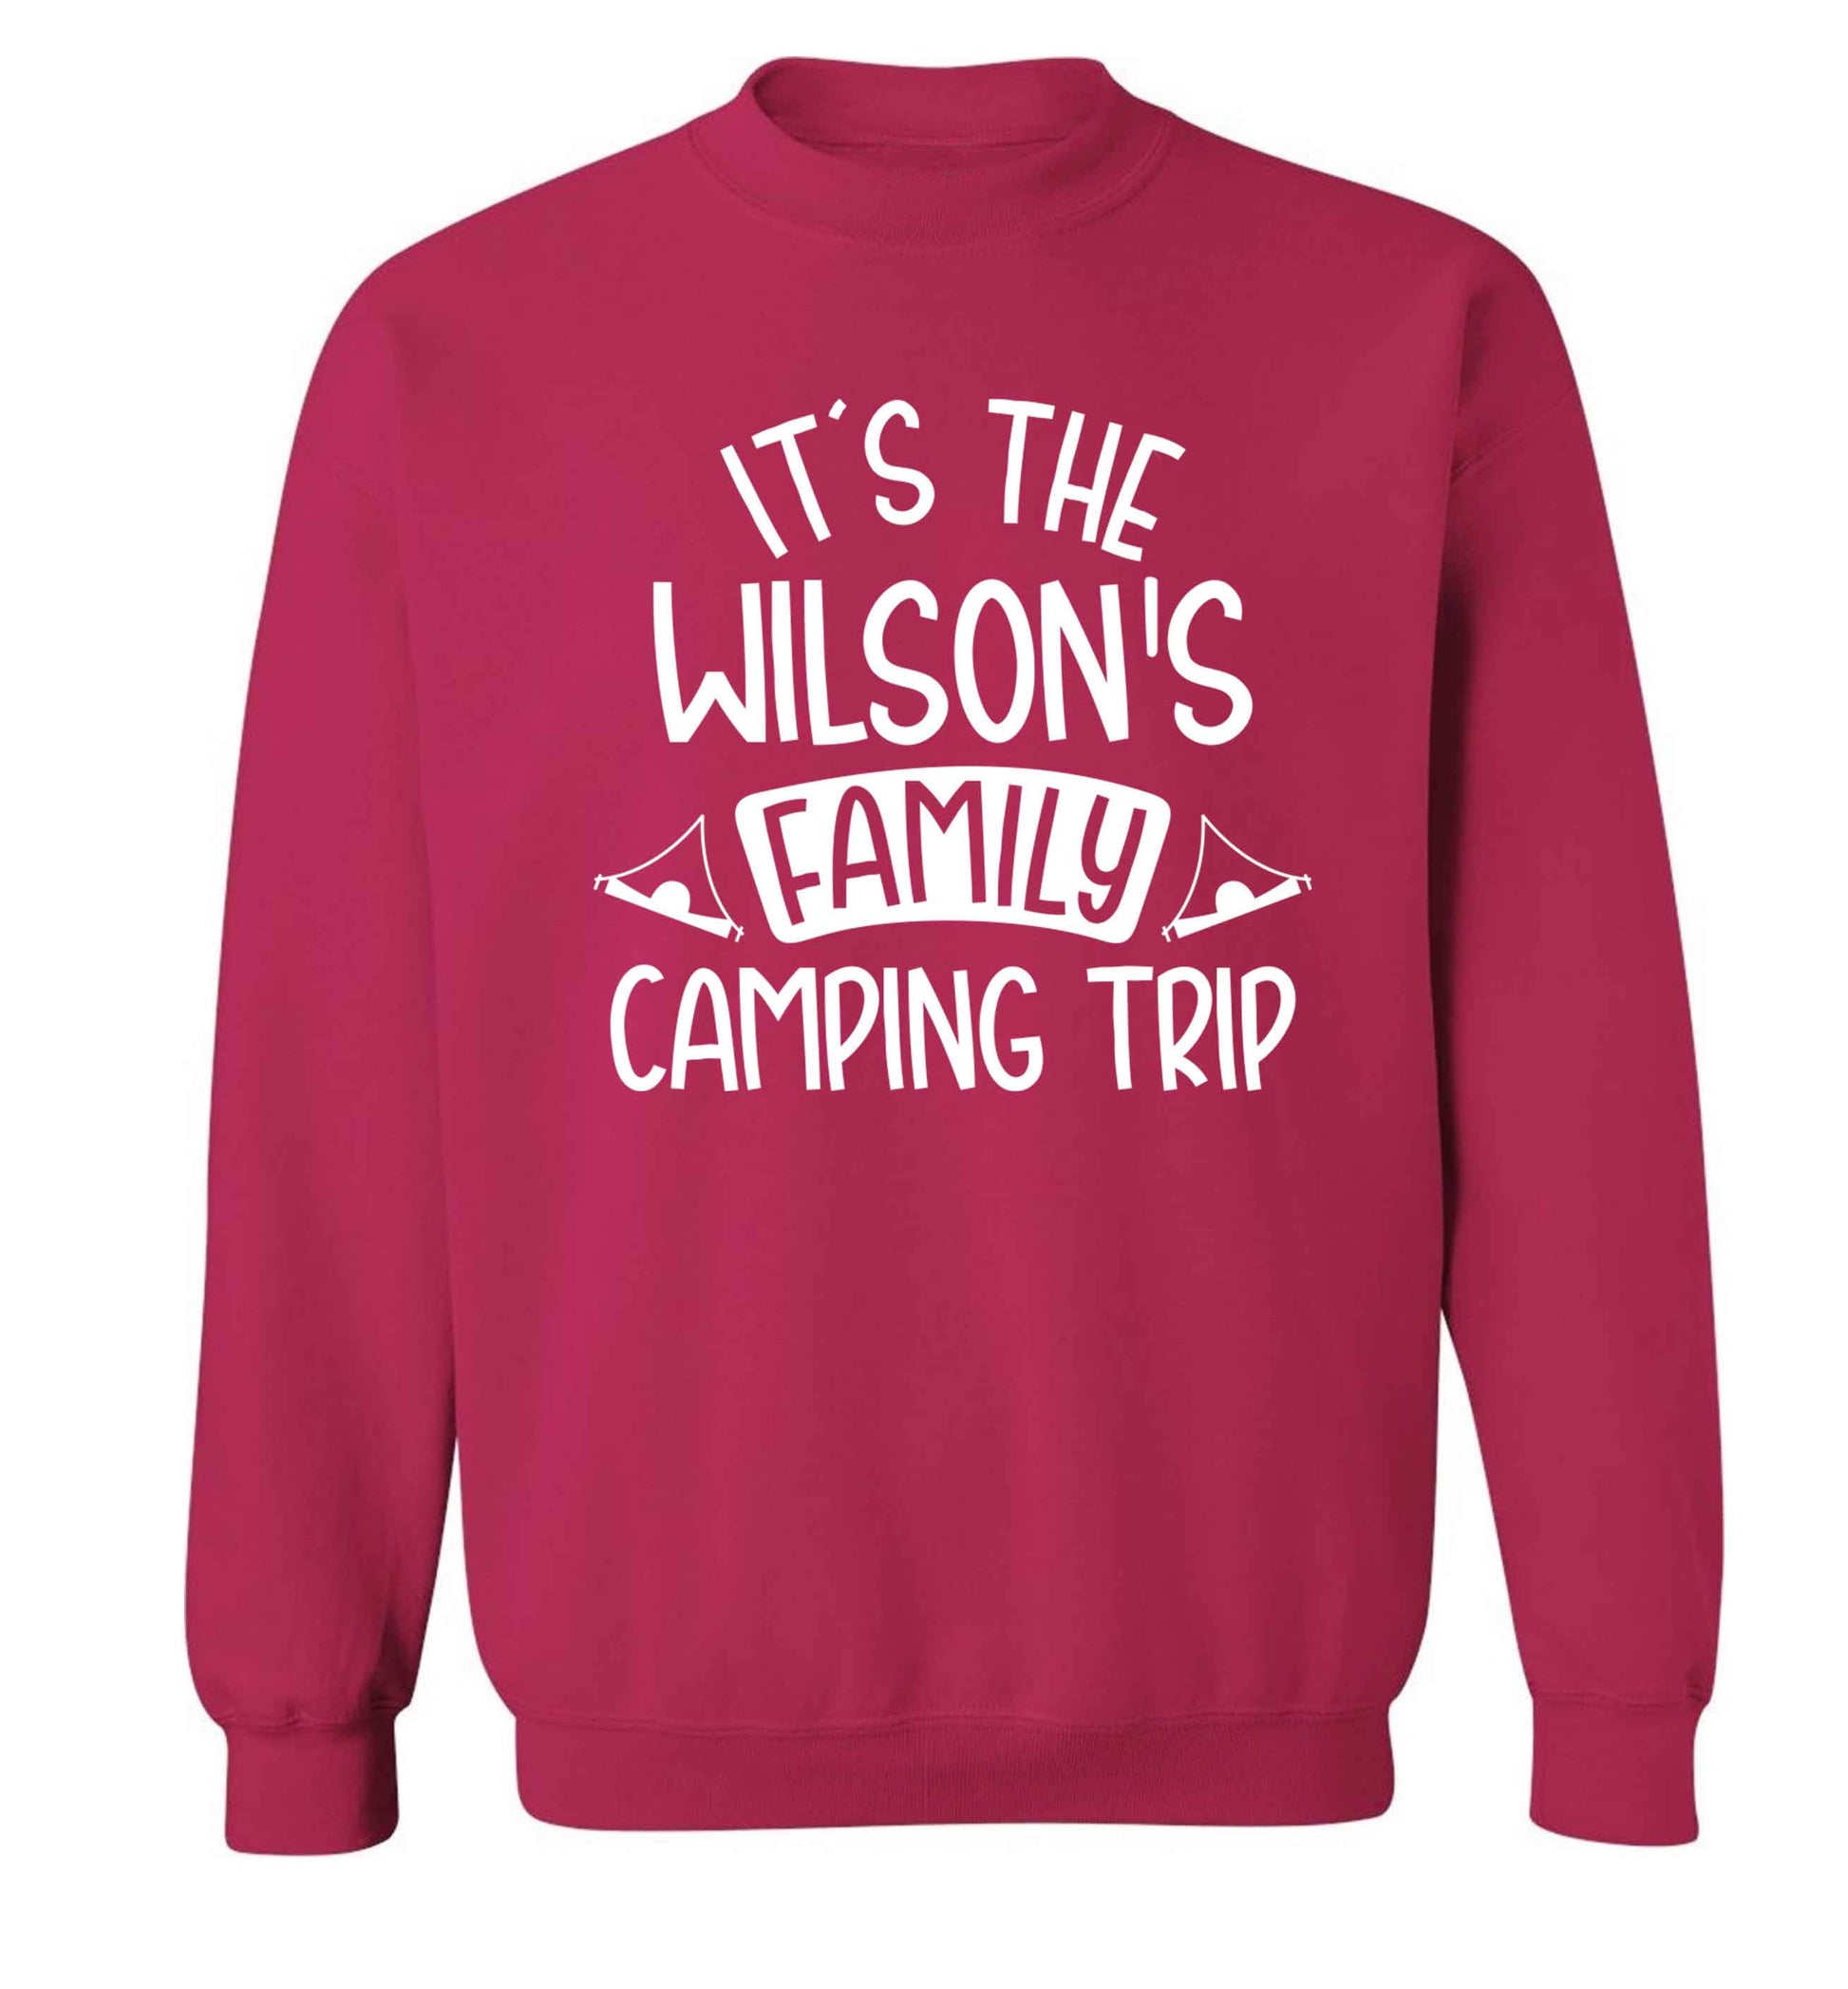 It's the Wilson's family camping trip personalised Adult's unisex pink Sweater 2XL